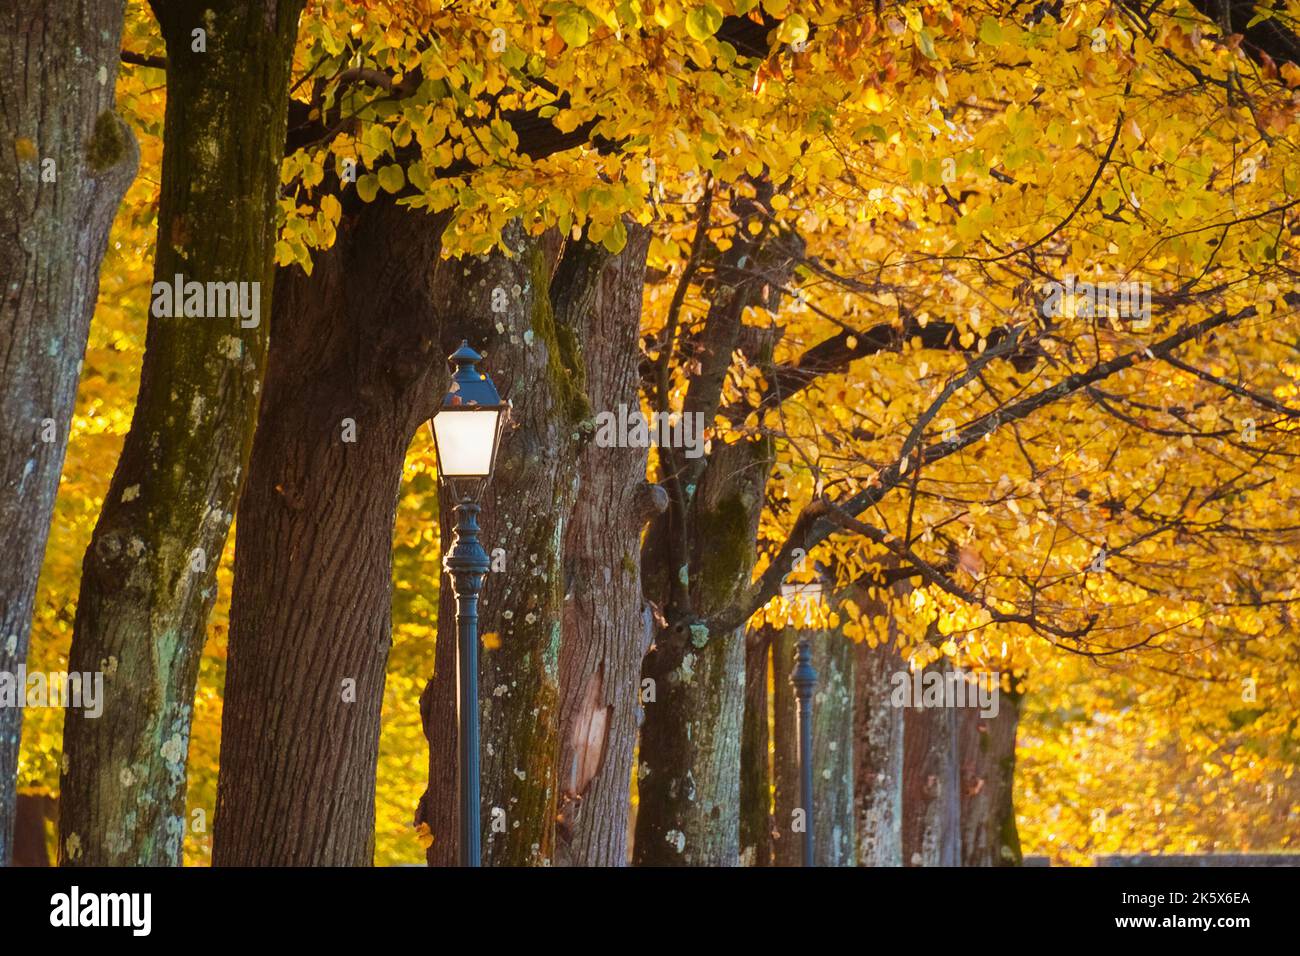 Autumn and foliage in the park. Vintage street lamps among autumnal leaves Stock Photo